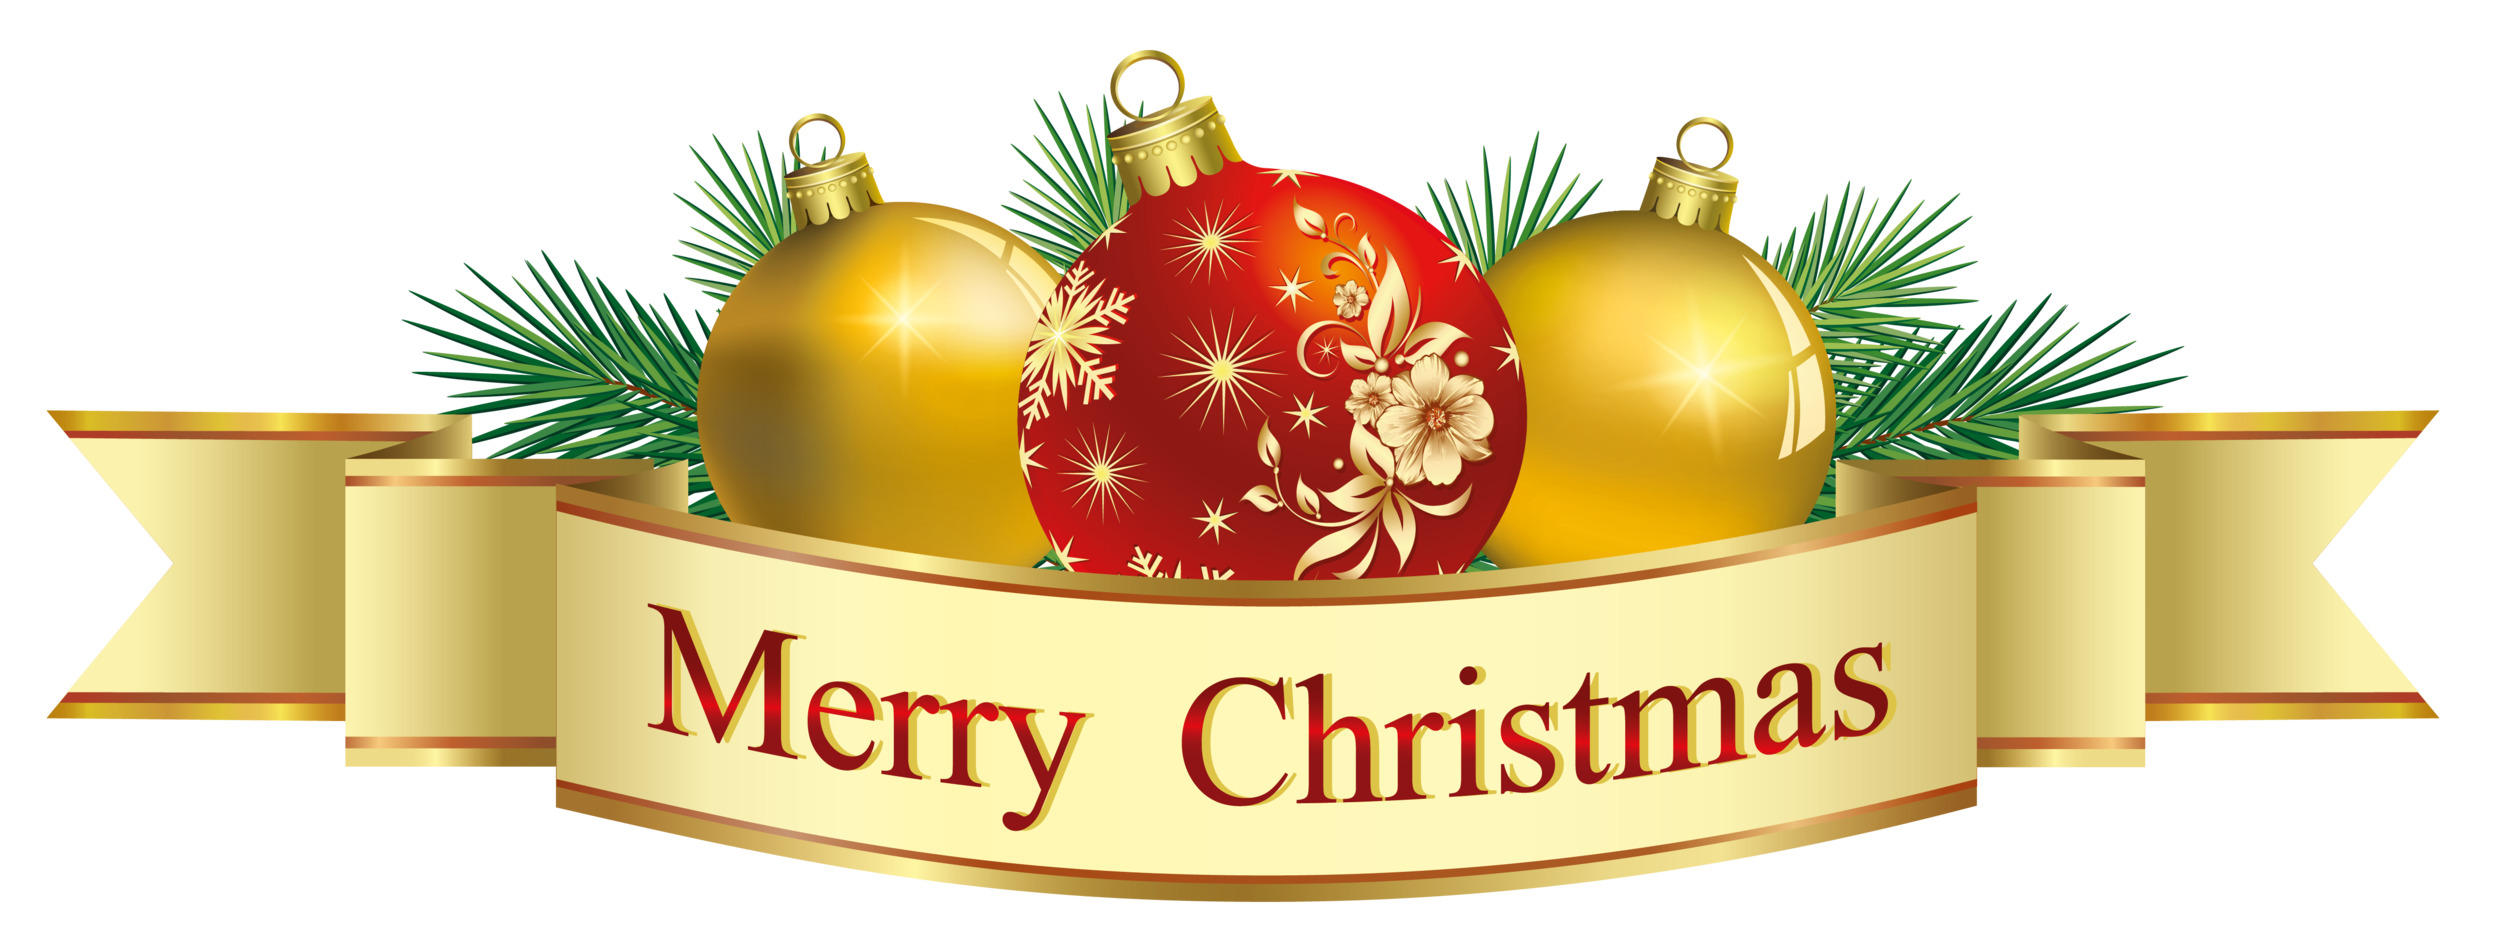 merry-christmas-clip-art-images1-klein-school-0cTsDF-clipart.png